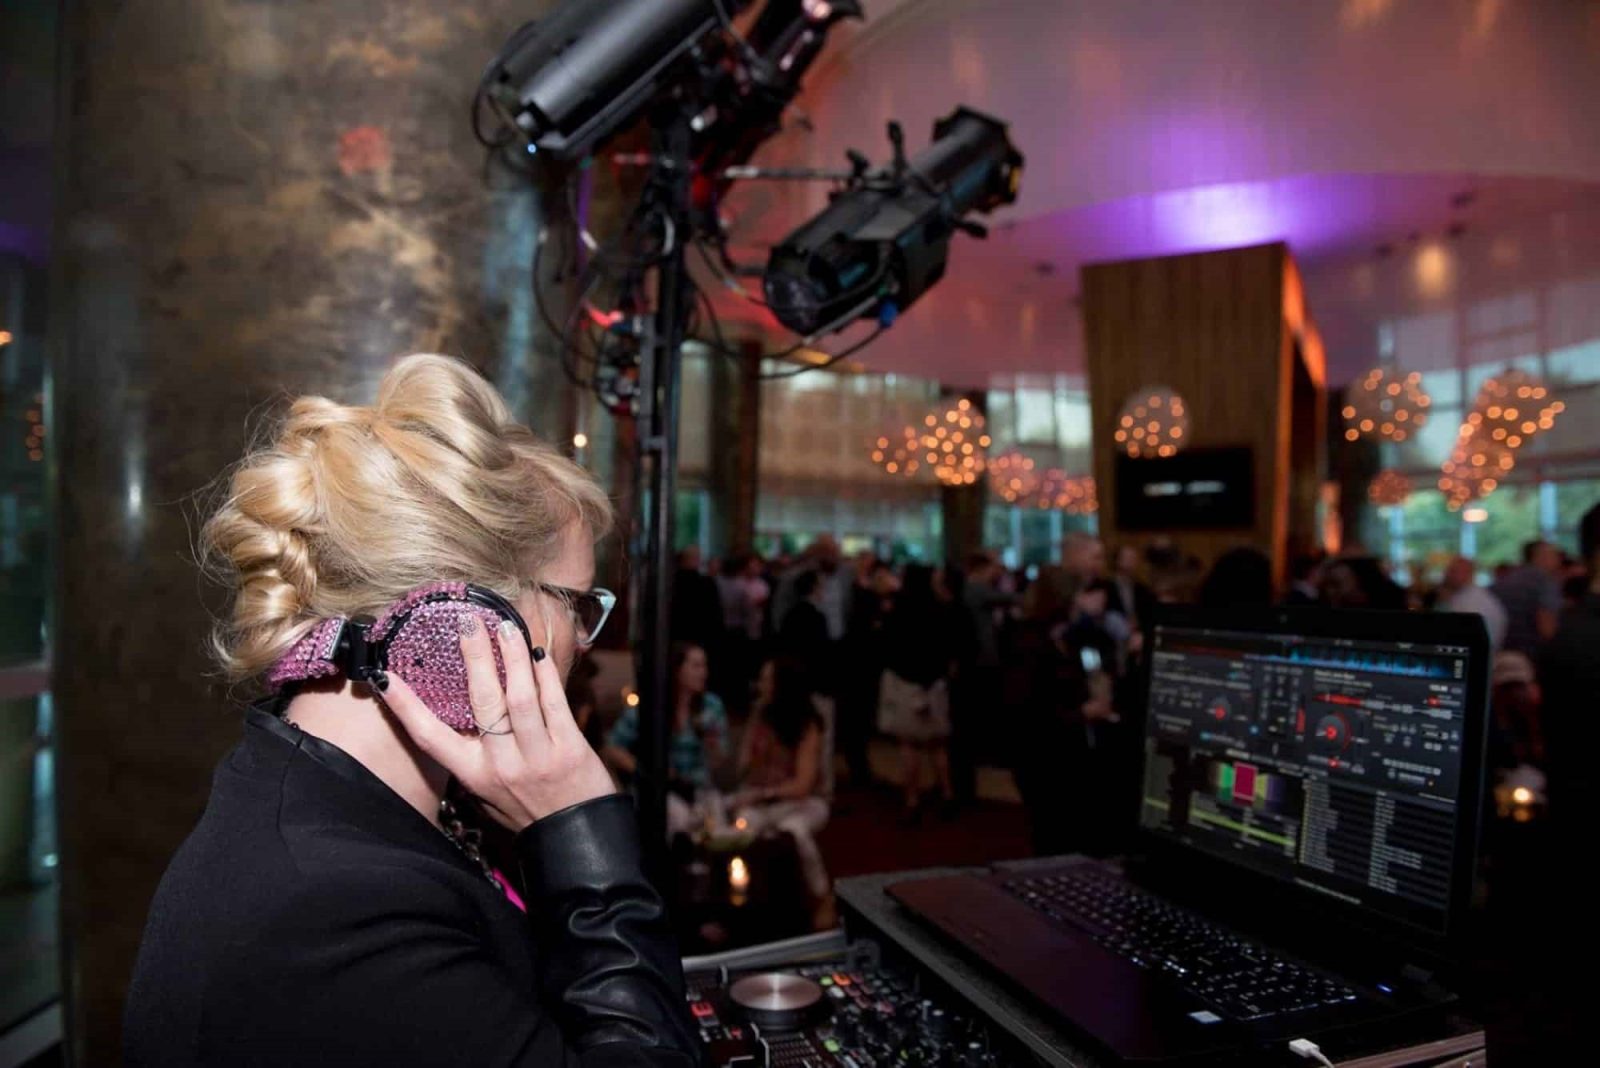 How Corporate Event DJs Can Take Your Company Party to the Next Level